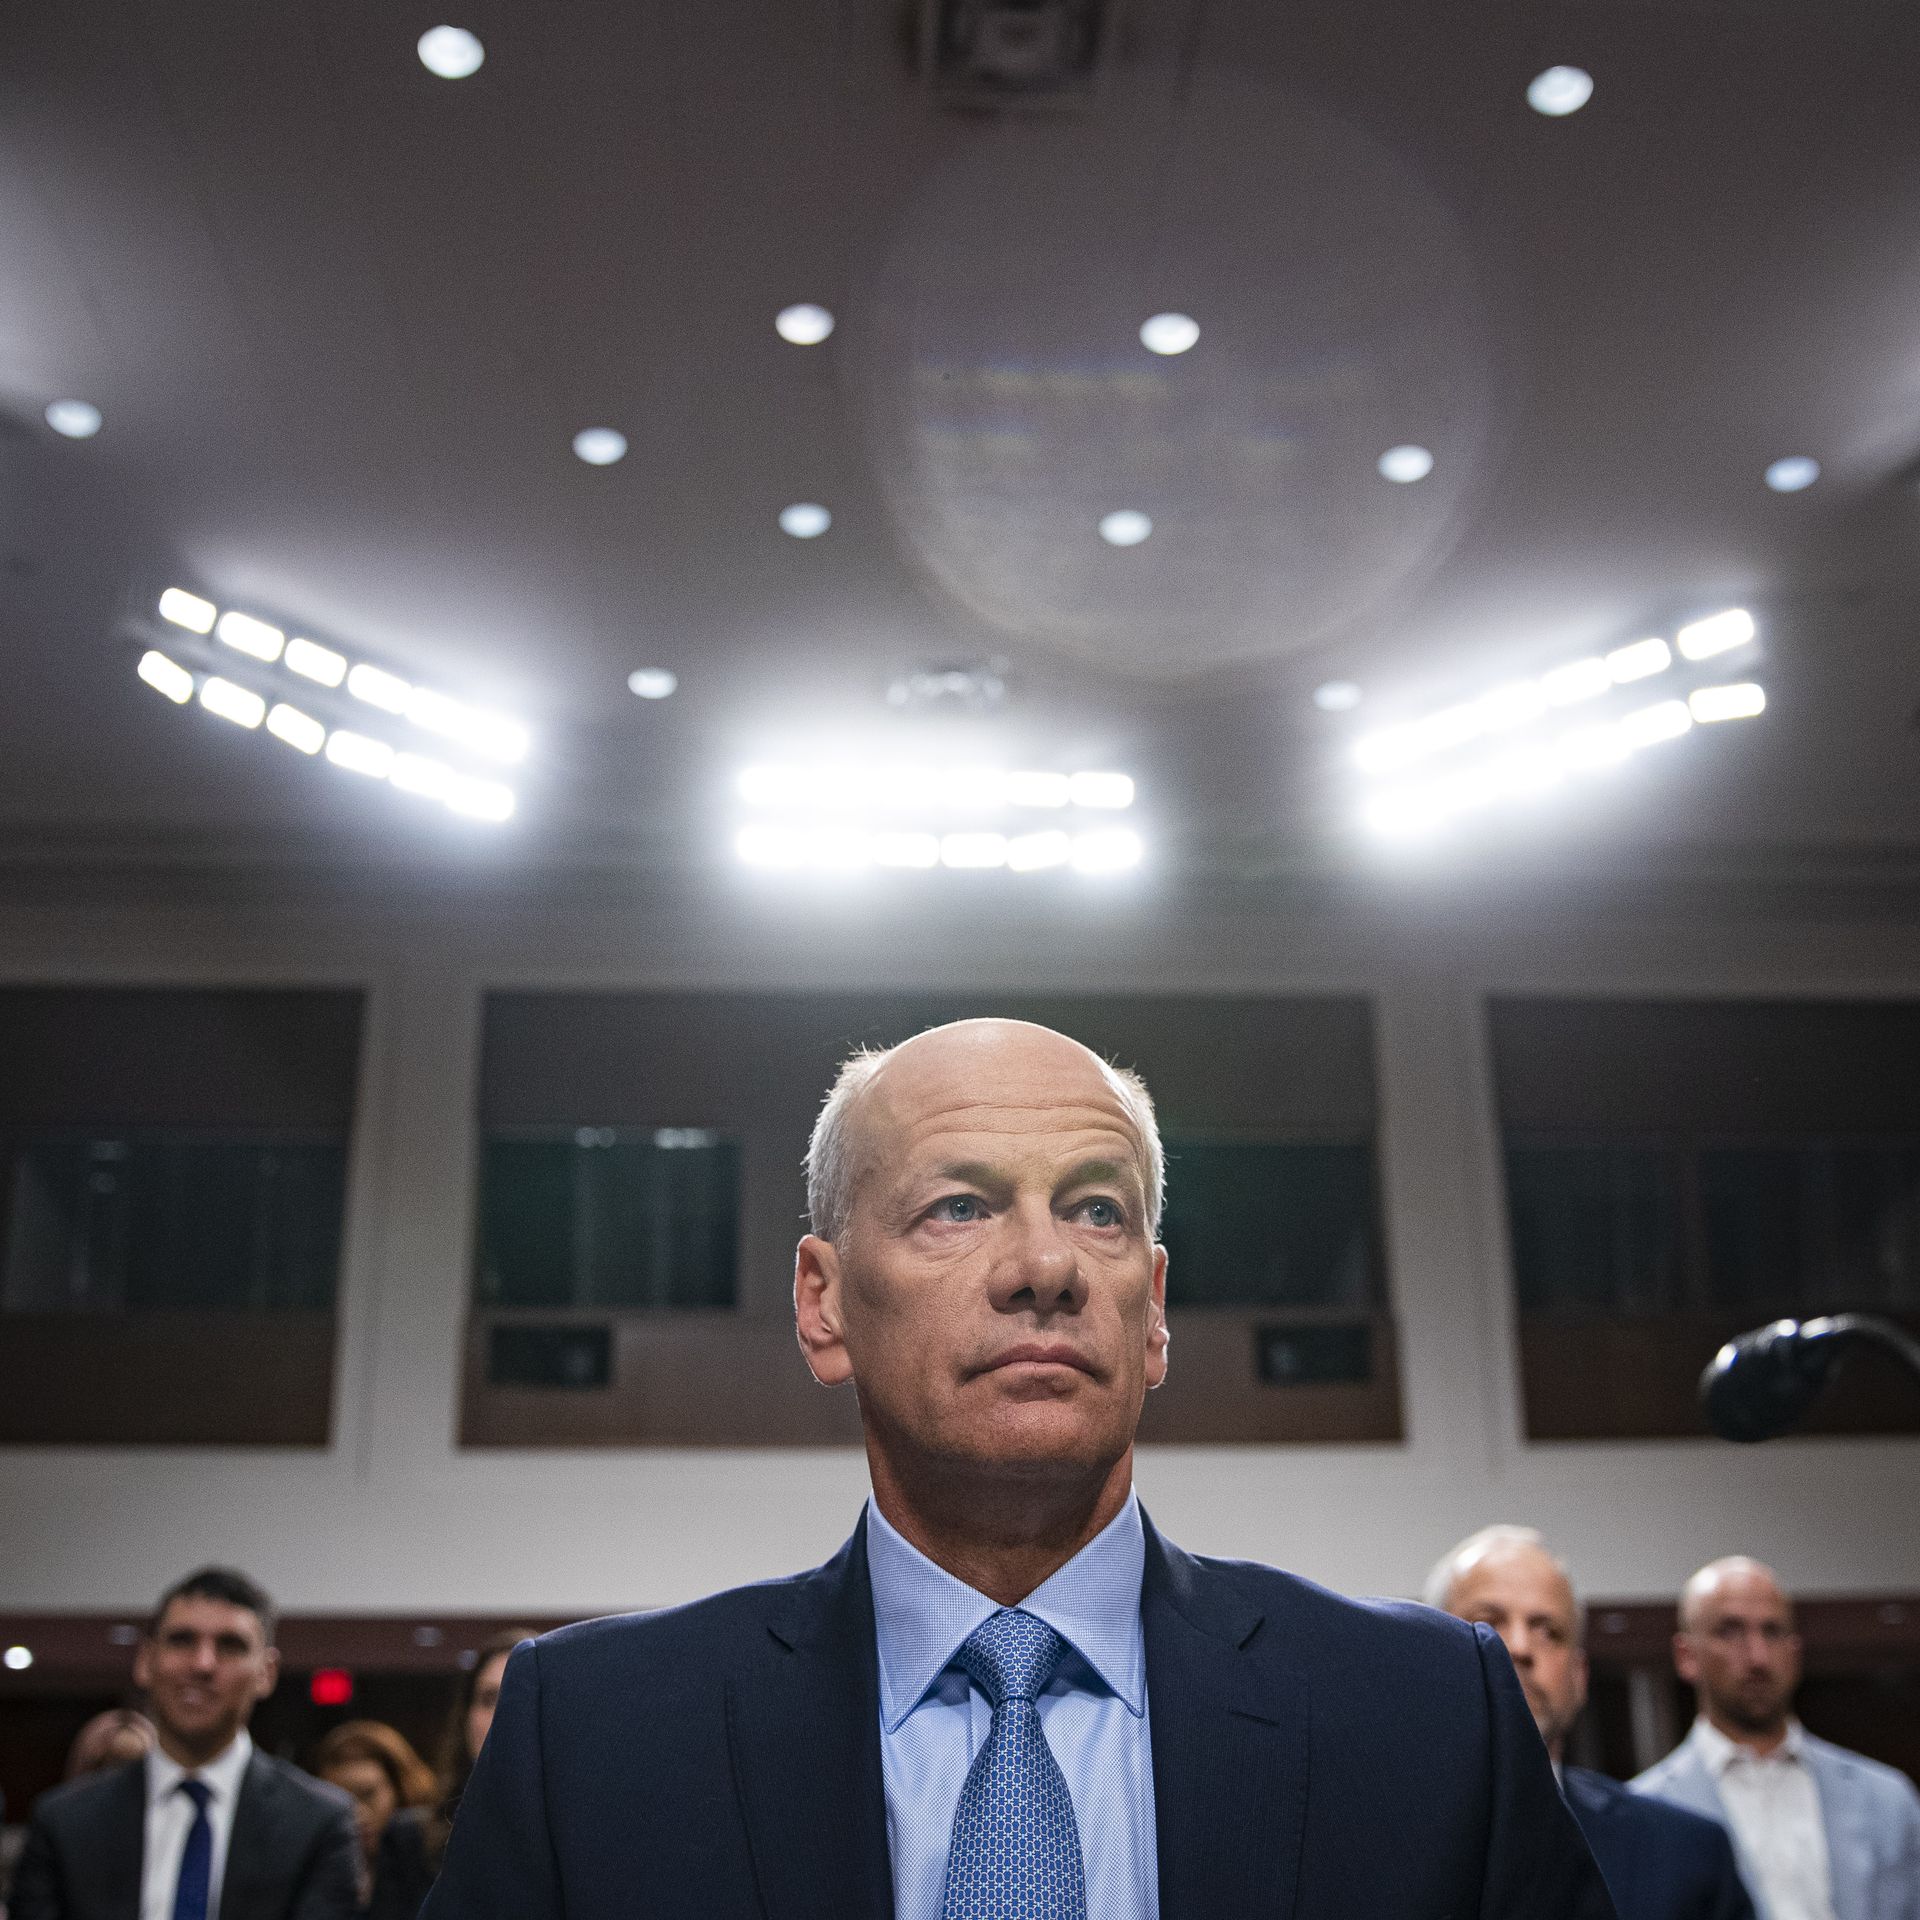 Greg Becker, former chief executive officer of Silicon Valley Bank, arrives during a Senate Banking, Housing, and Urban Affairs Committee hearing in Washington, DC, US, on Tuesday, May 16, 2023. 